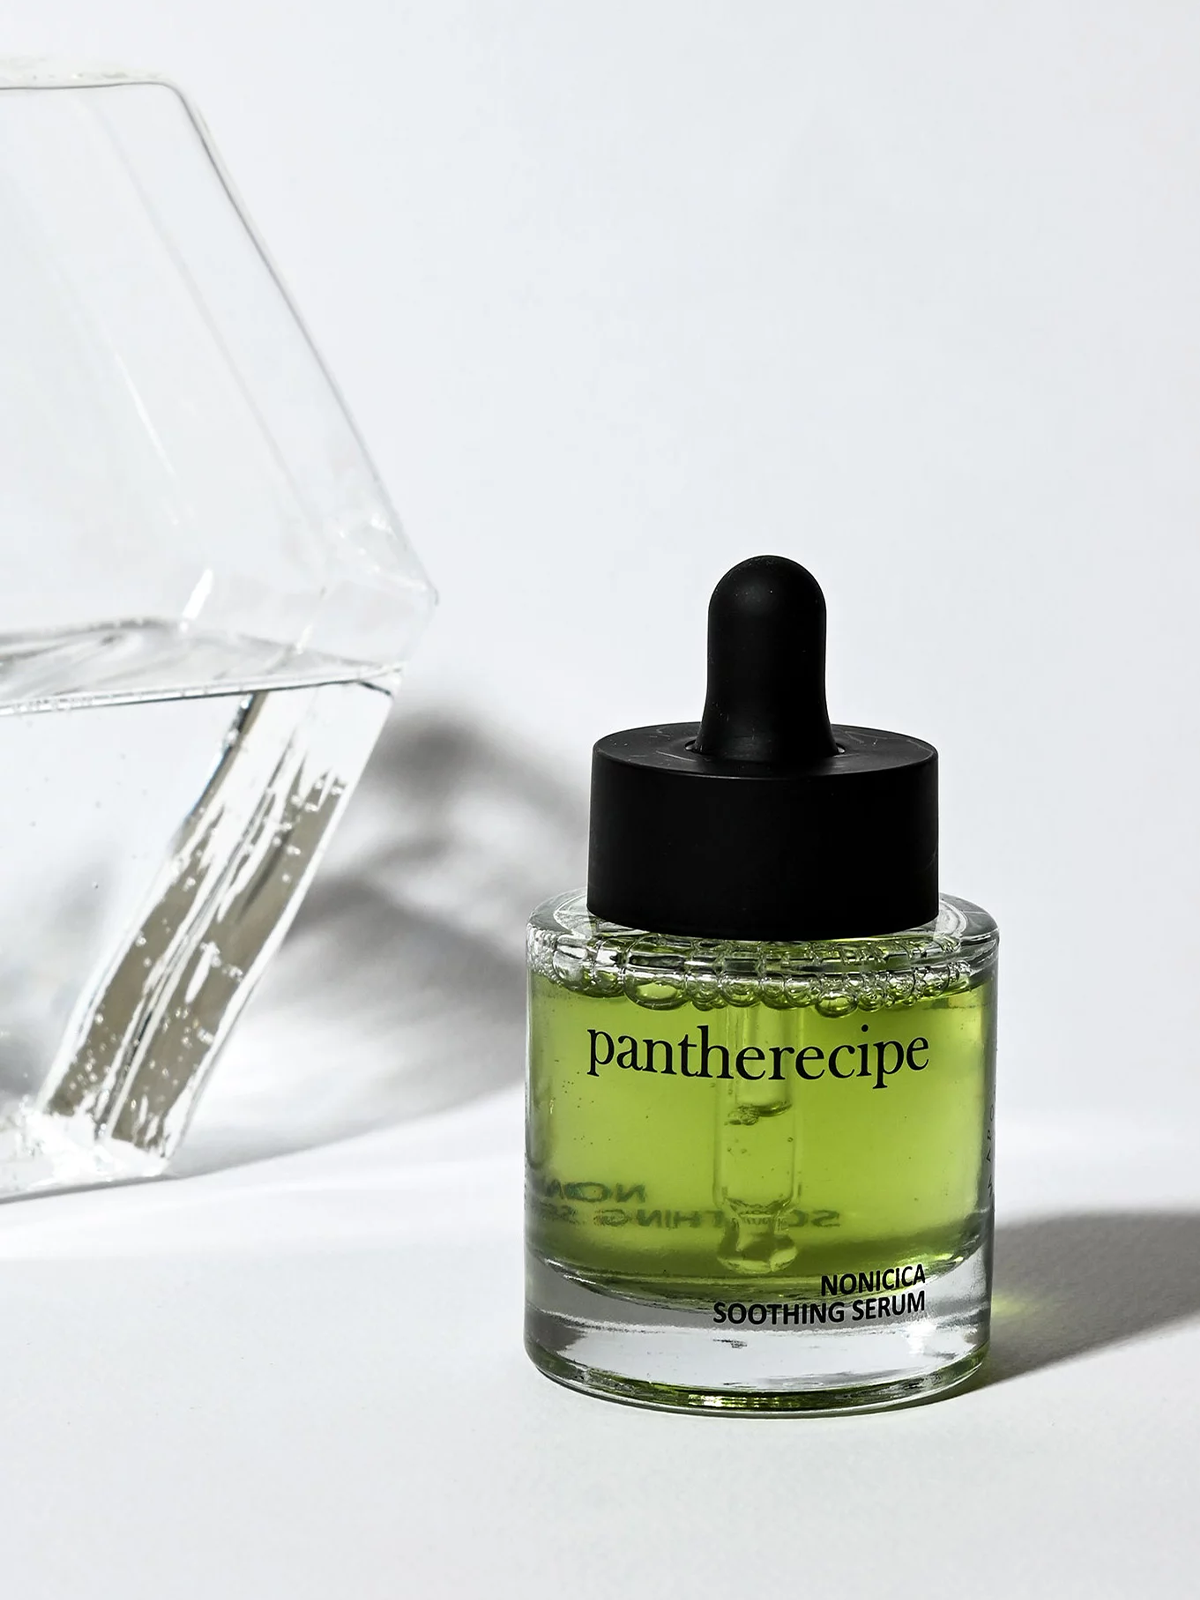 Pantherecipe NoniCica Soothing Serum - The Collective